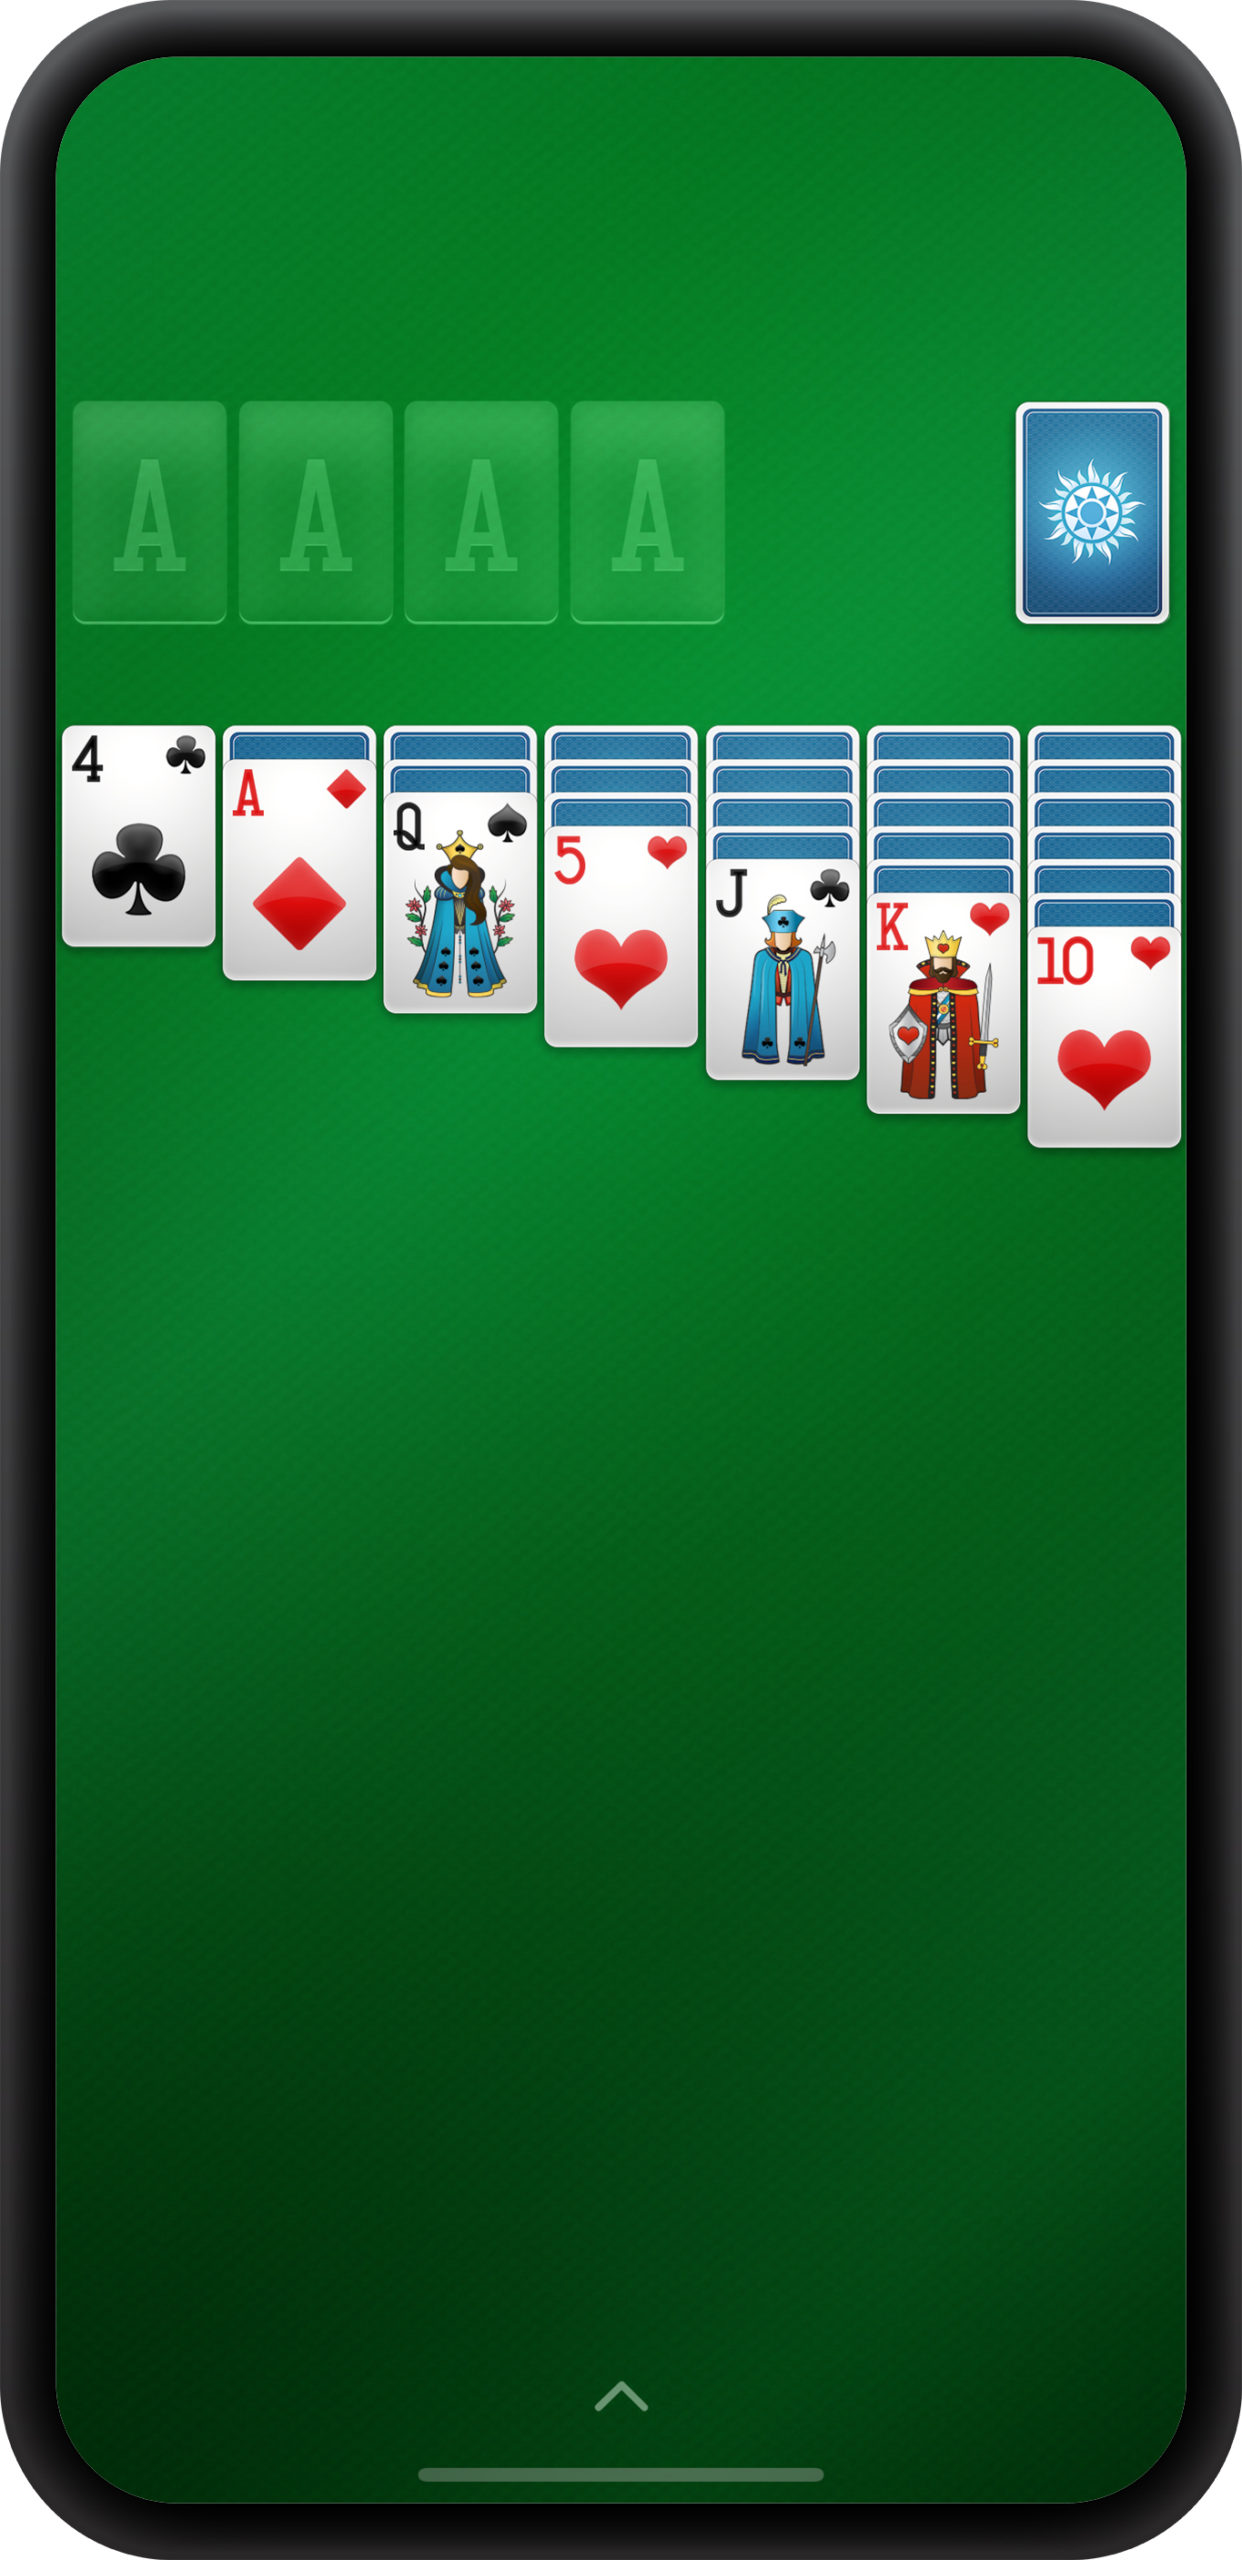 Solitaire - Game Support